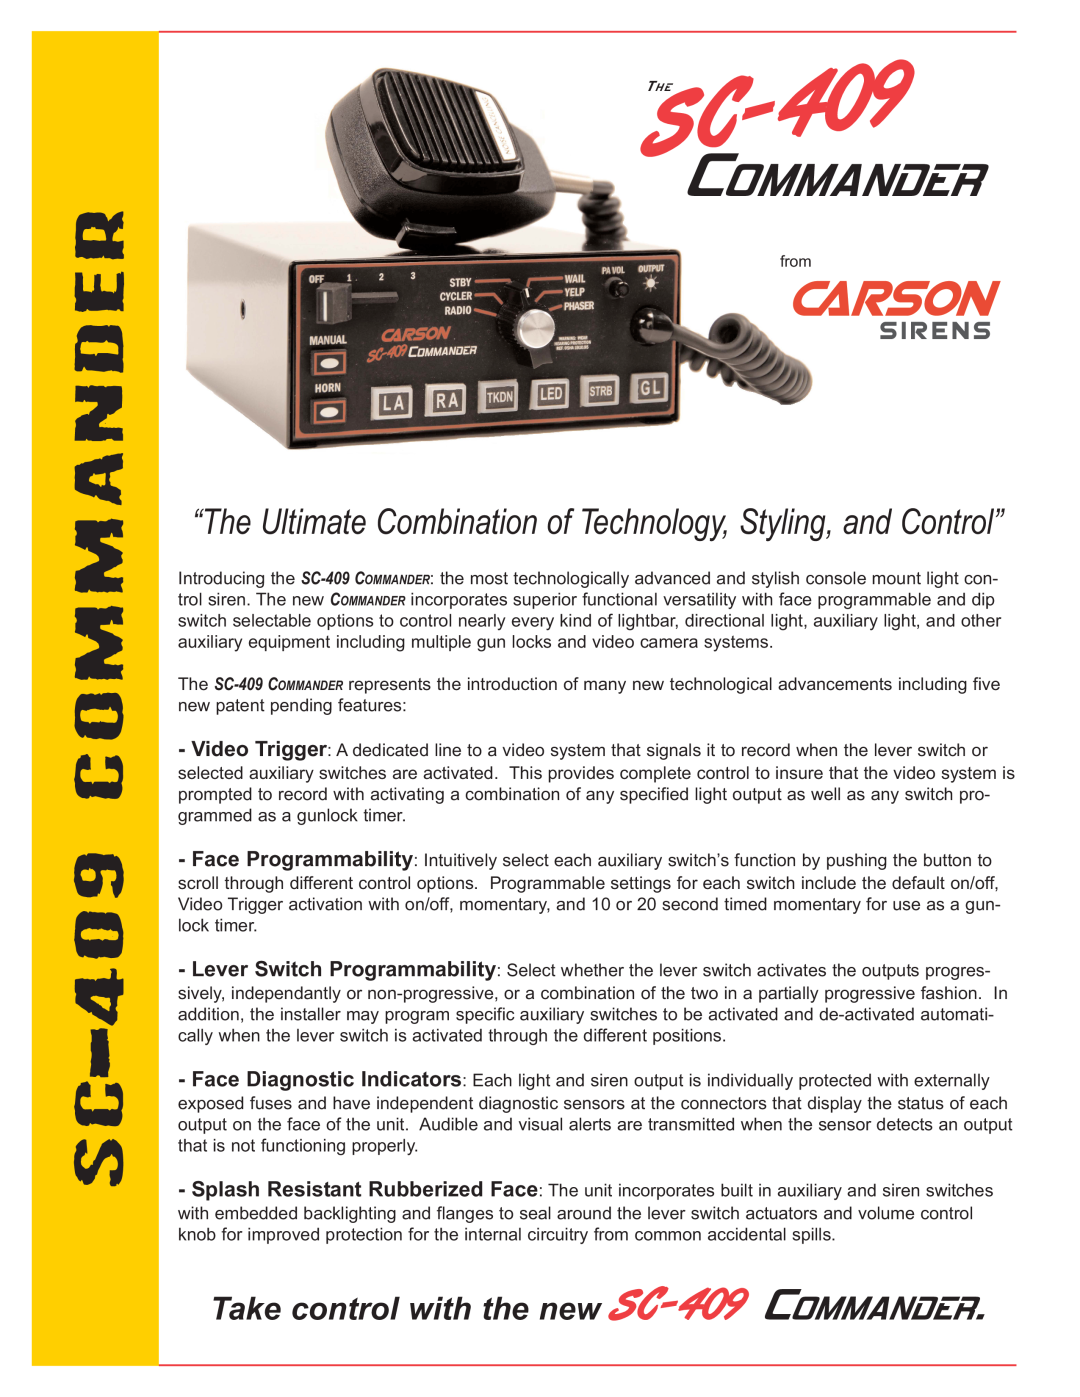 Carson SC-409 manual Commander, Take control with the new SC -409 COMMANDER 